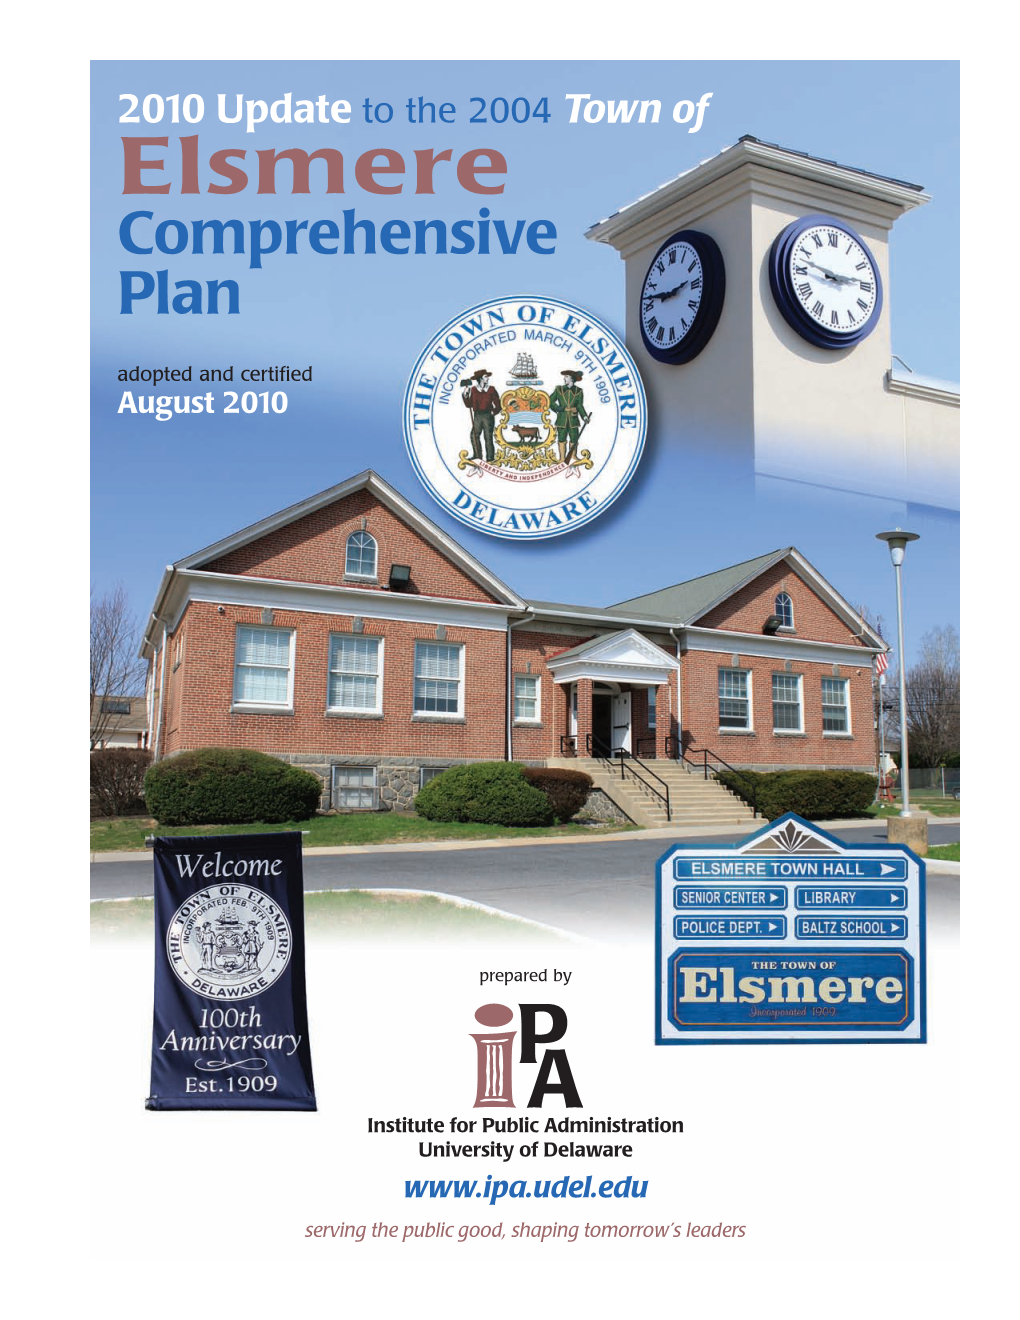 Comprehensive Plan Adopted and Certified August 2010